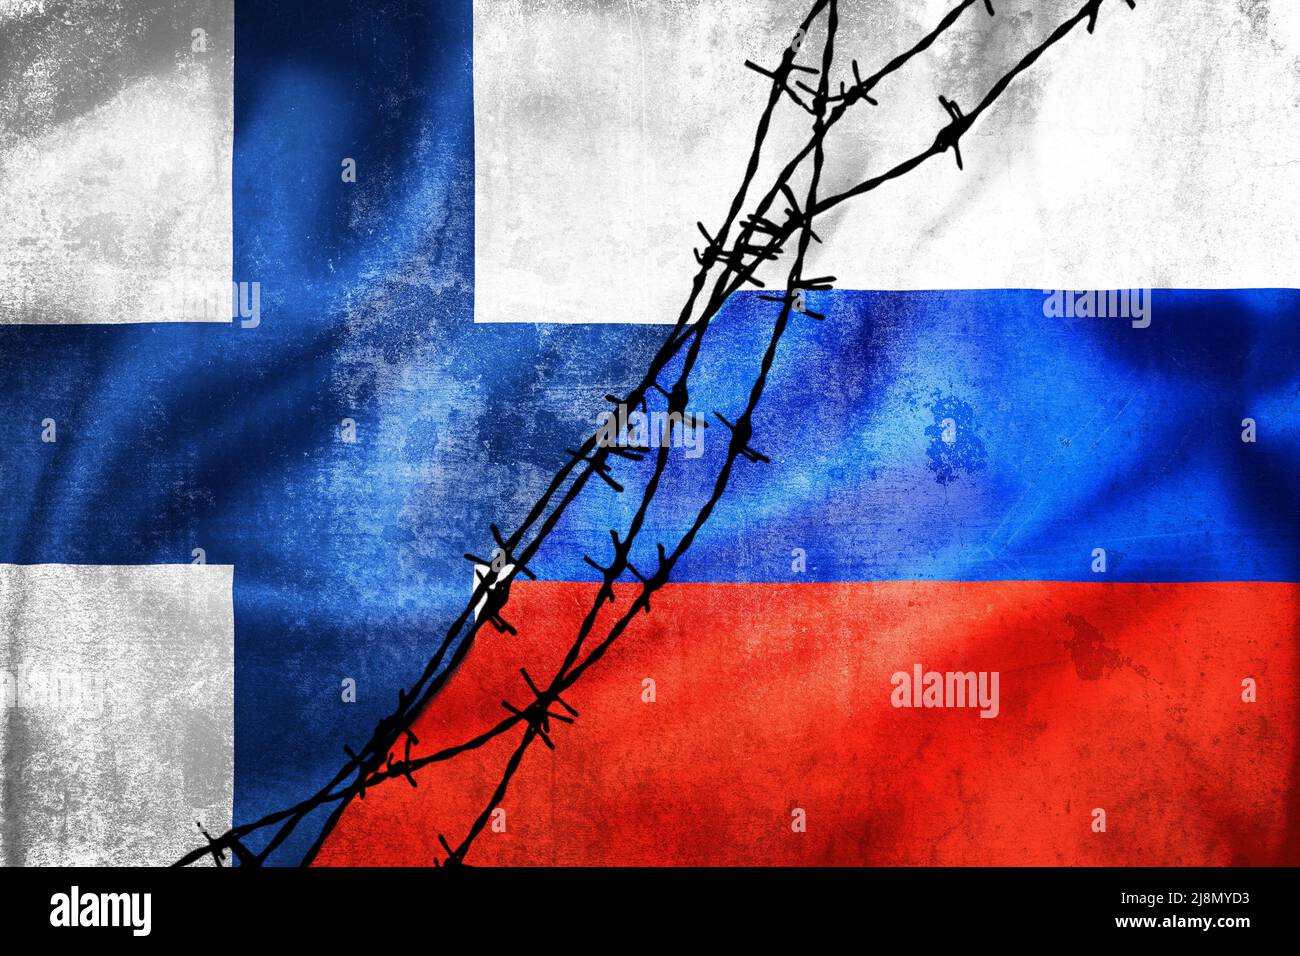 Grunge flags of Russian Federation and Finland divided by barb wire illustration, concept of tense relations between west and Russia Stock Photo